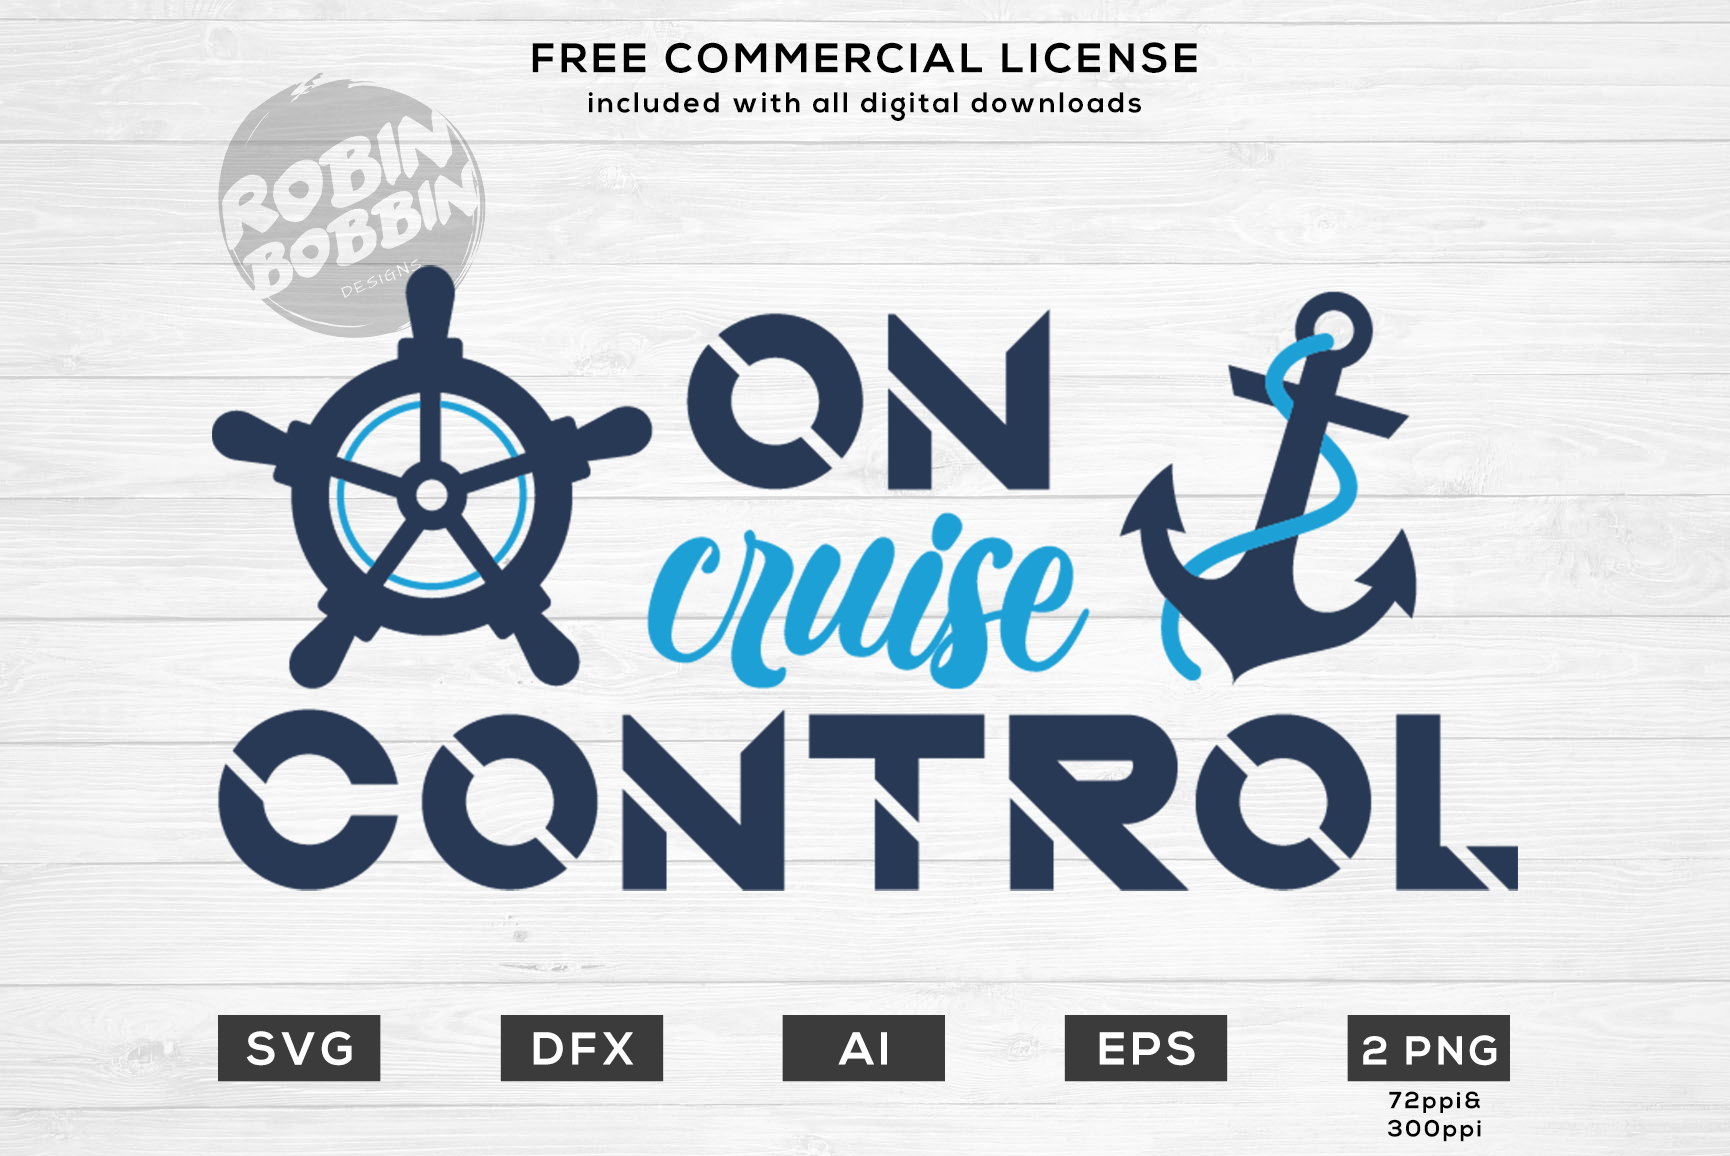 Download On Cruise Control Design for T-Shirt, Hoodies, Mugs and more